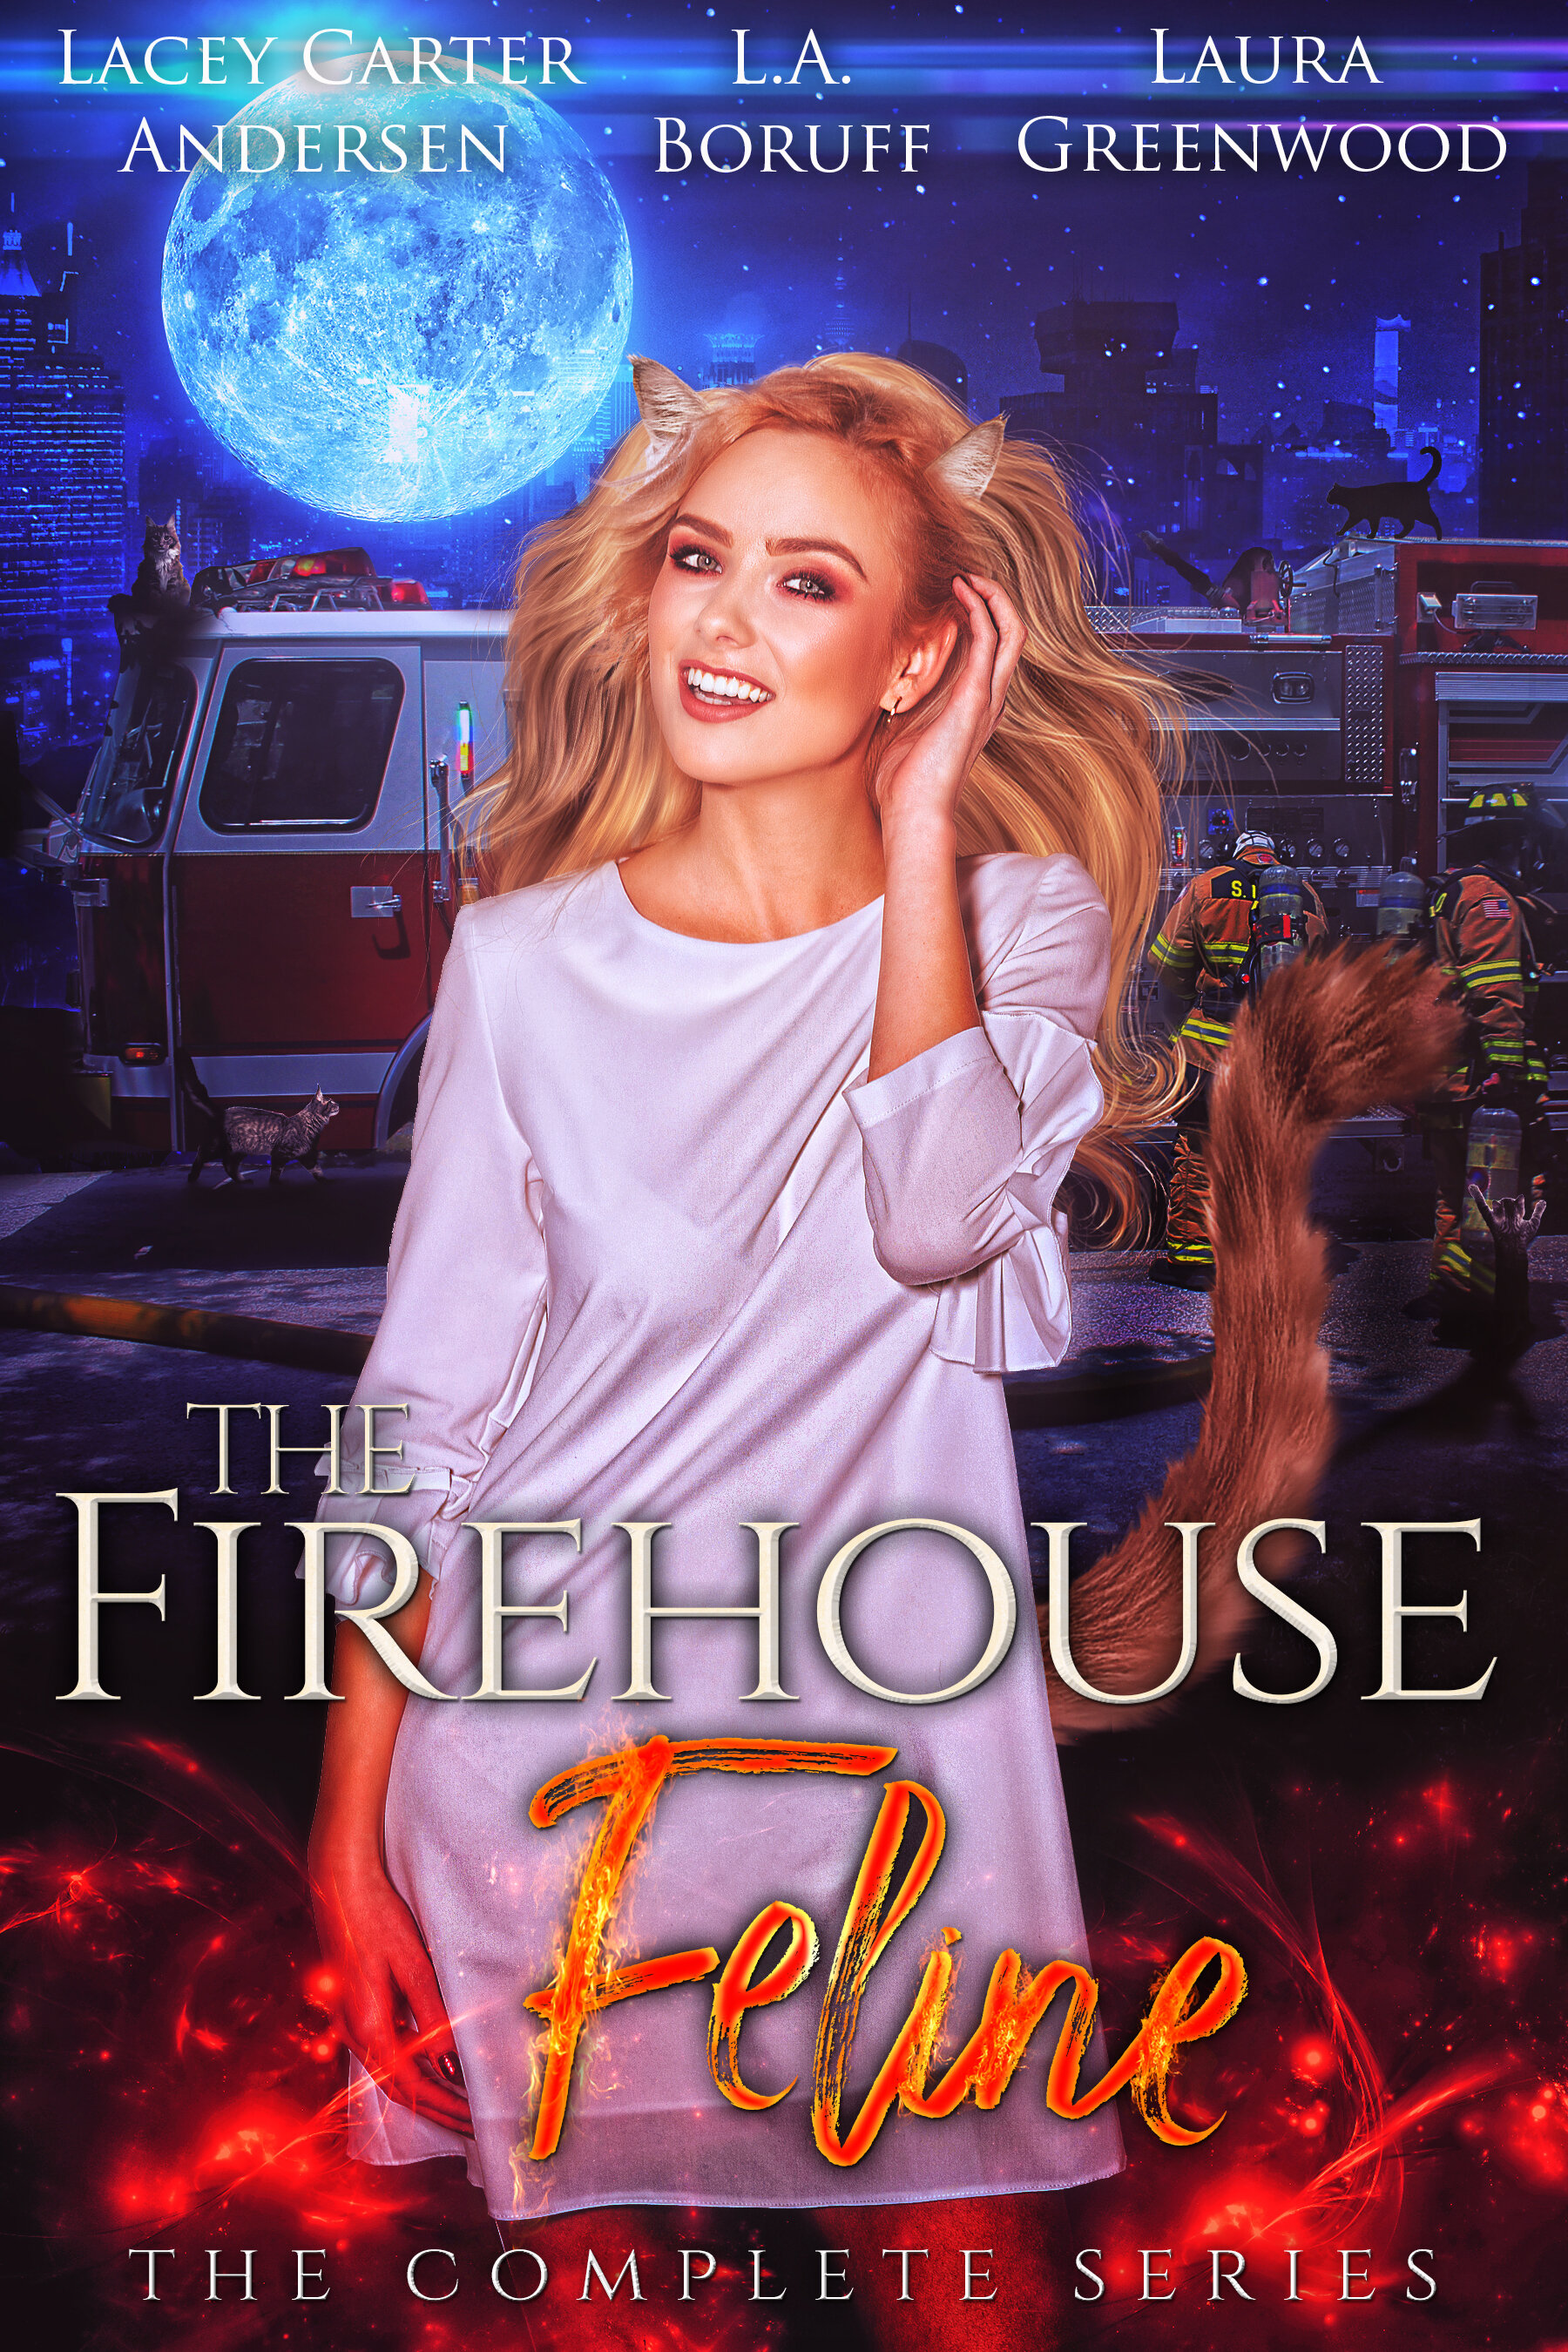 The Firehouse Feline - The Complete Series second title style v1.jpg